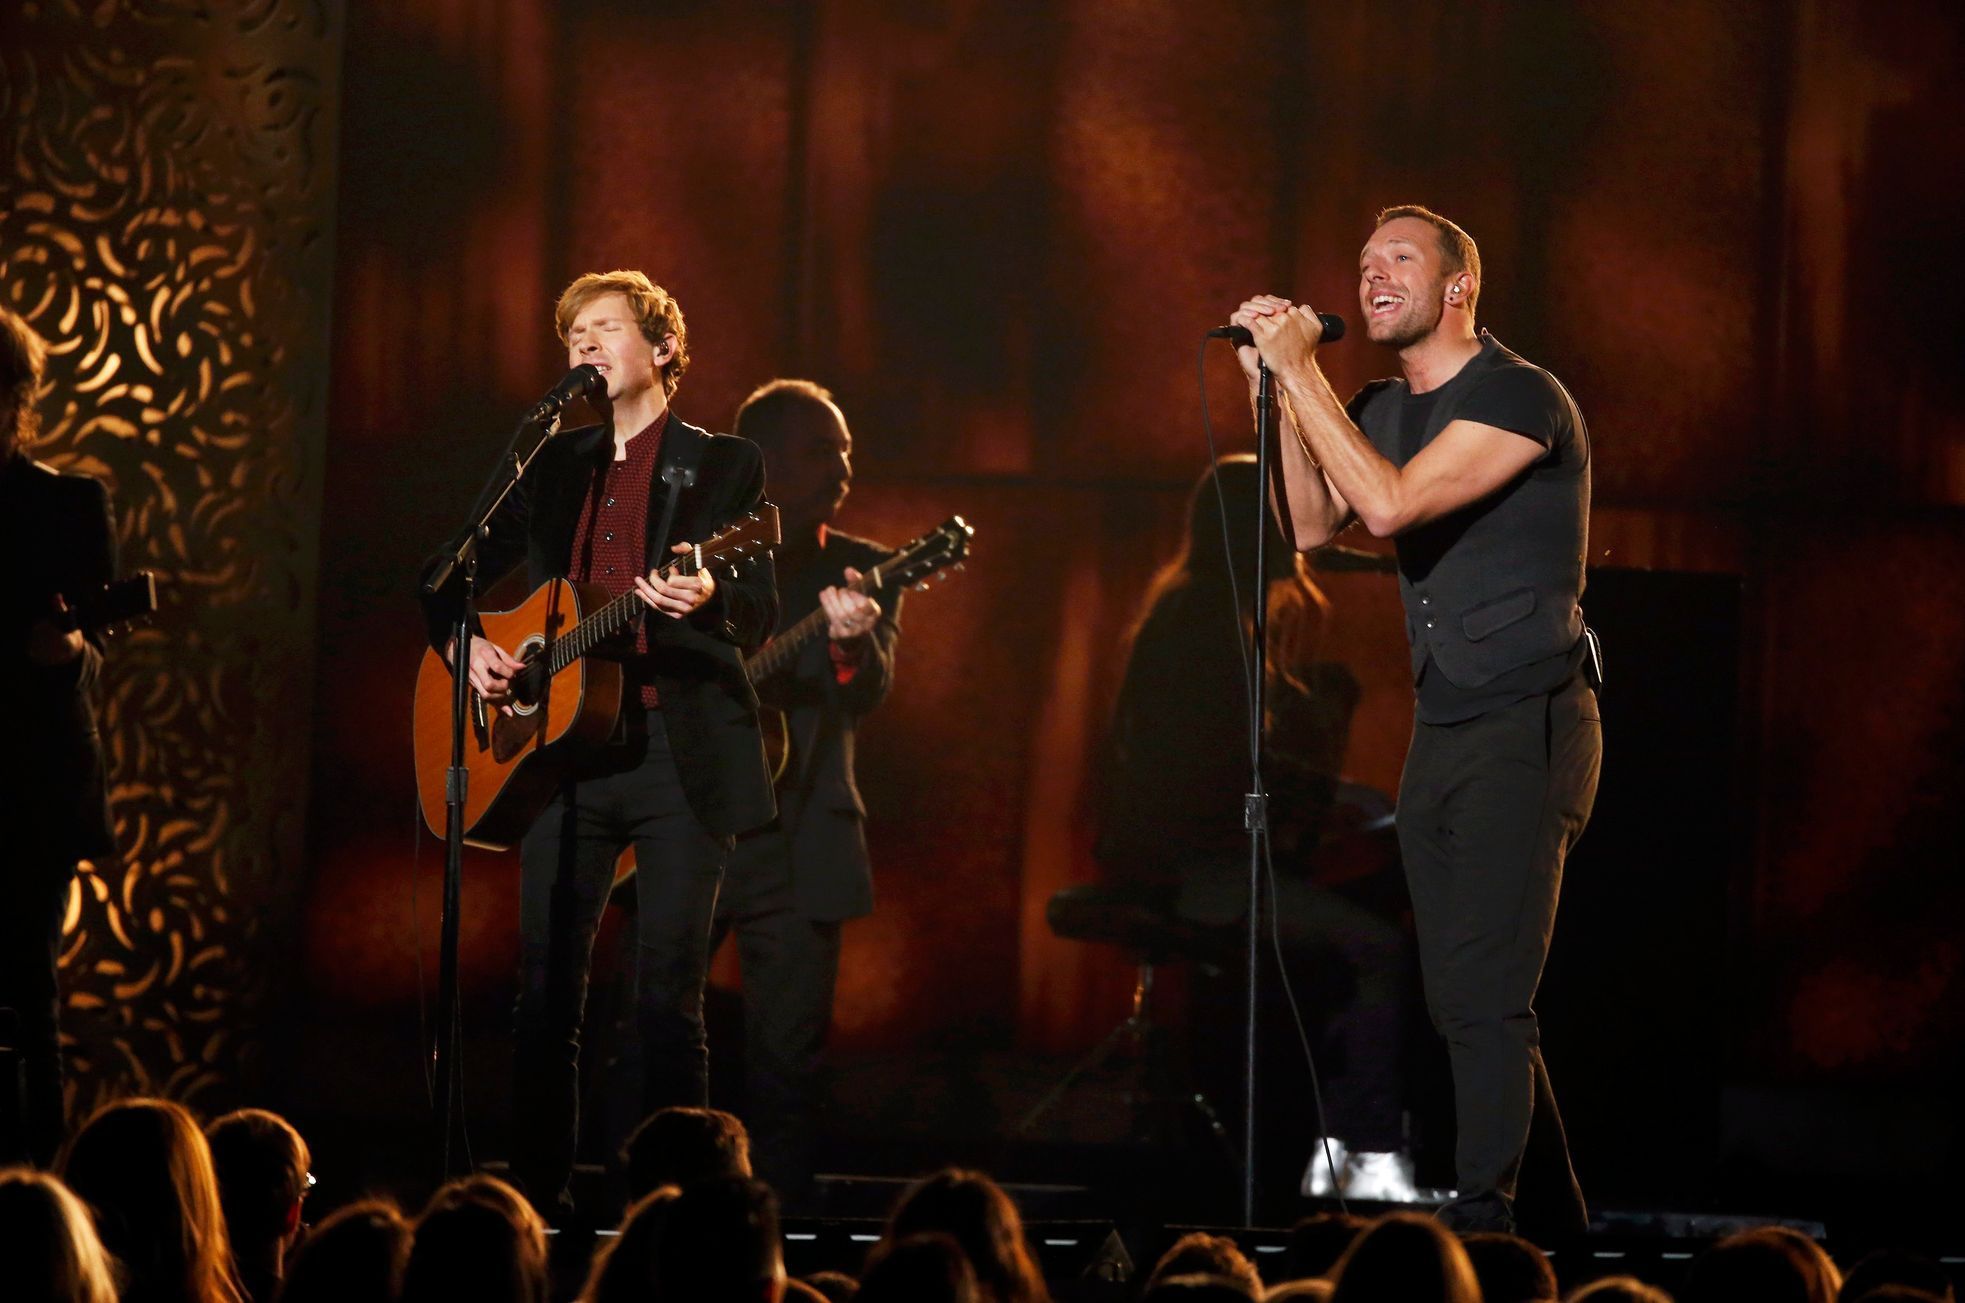 Beck and Chris Martin perform during the 57th annual Grammy Awards in Los Angeles